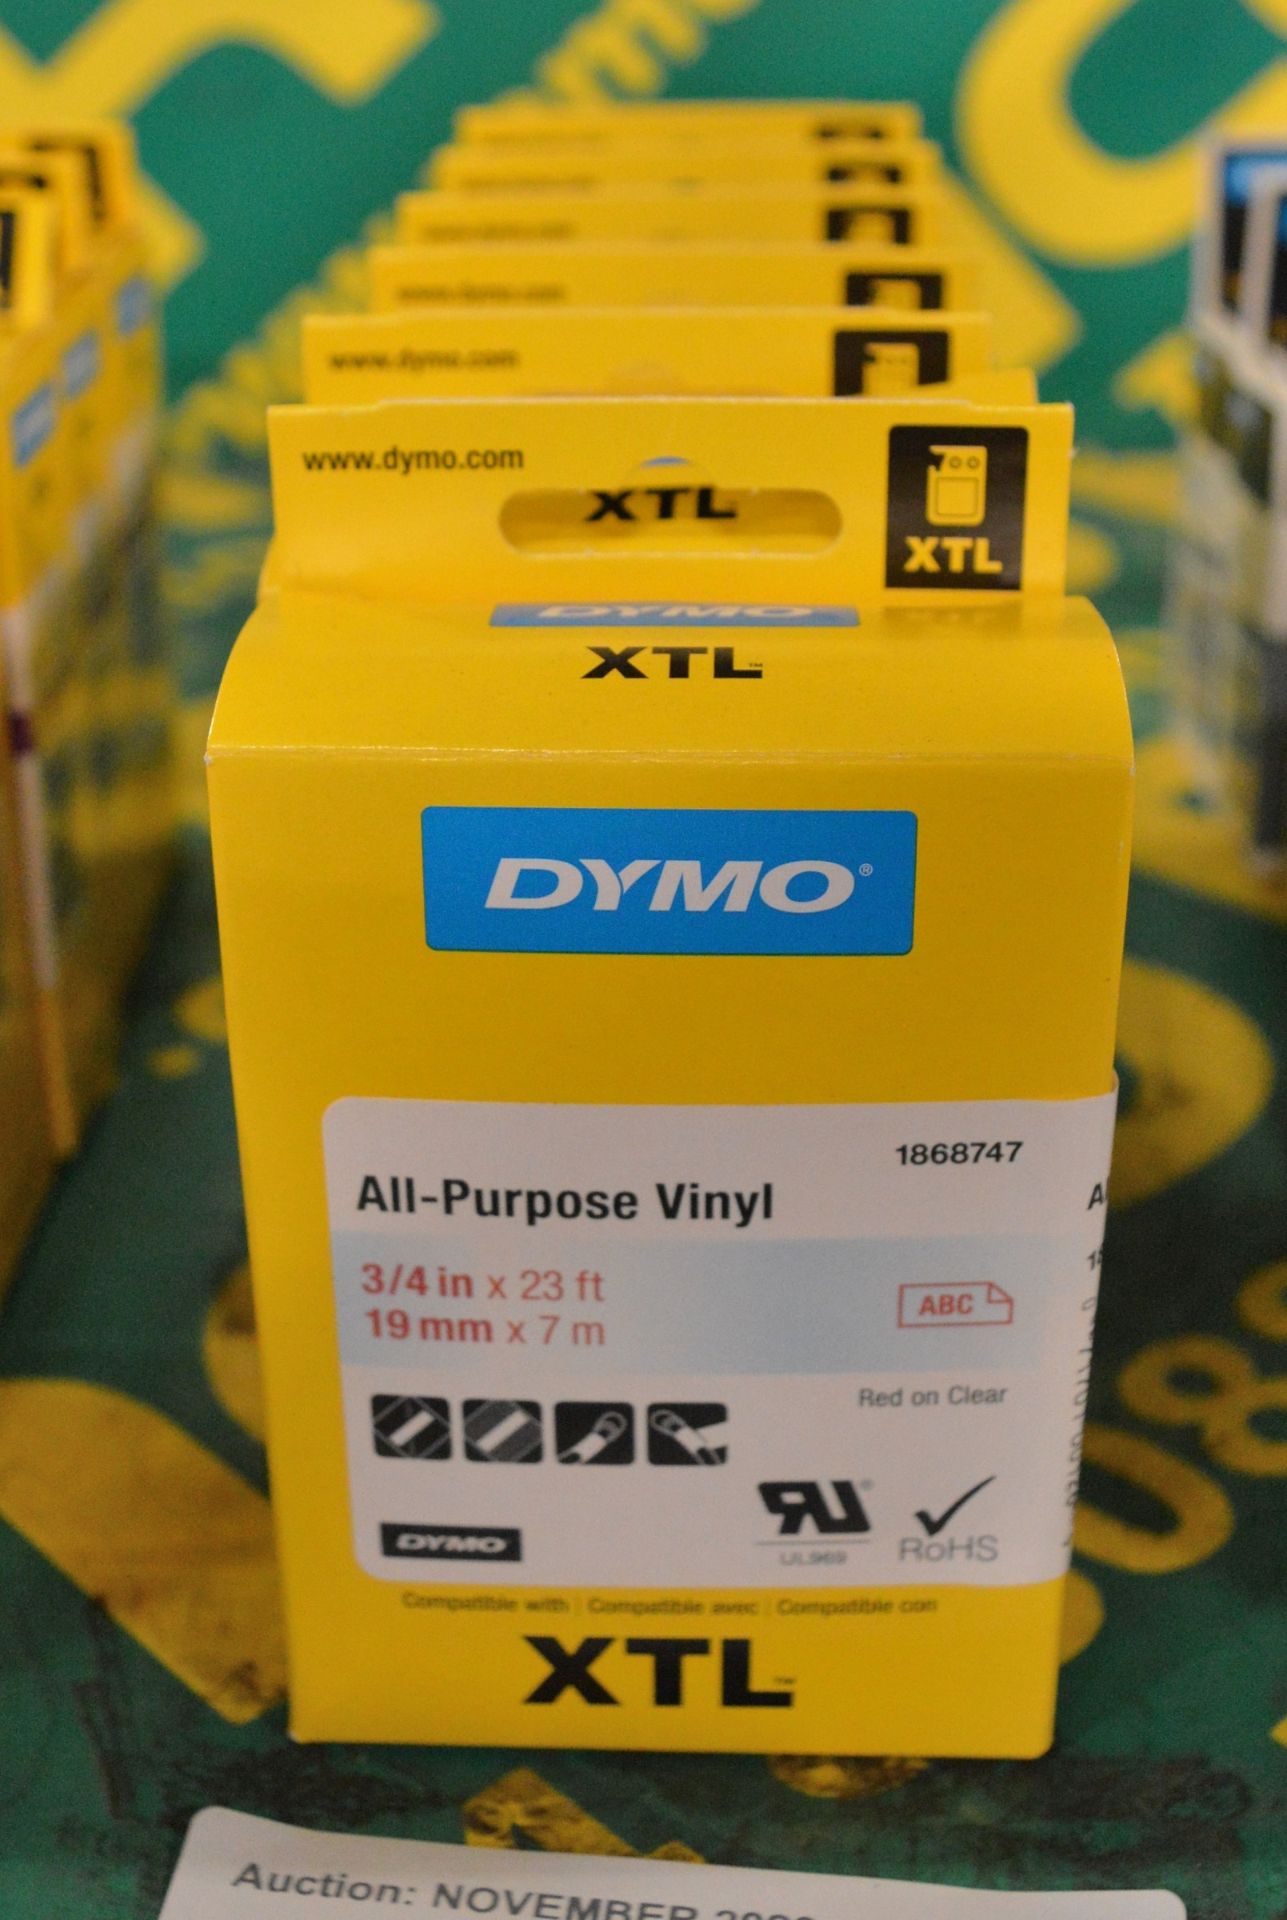 6x Dymo XTL All Purpose Vinyl - 3/4in x 23ft - 19mm x 7m - Red on Clear Printer Tape